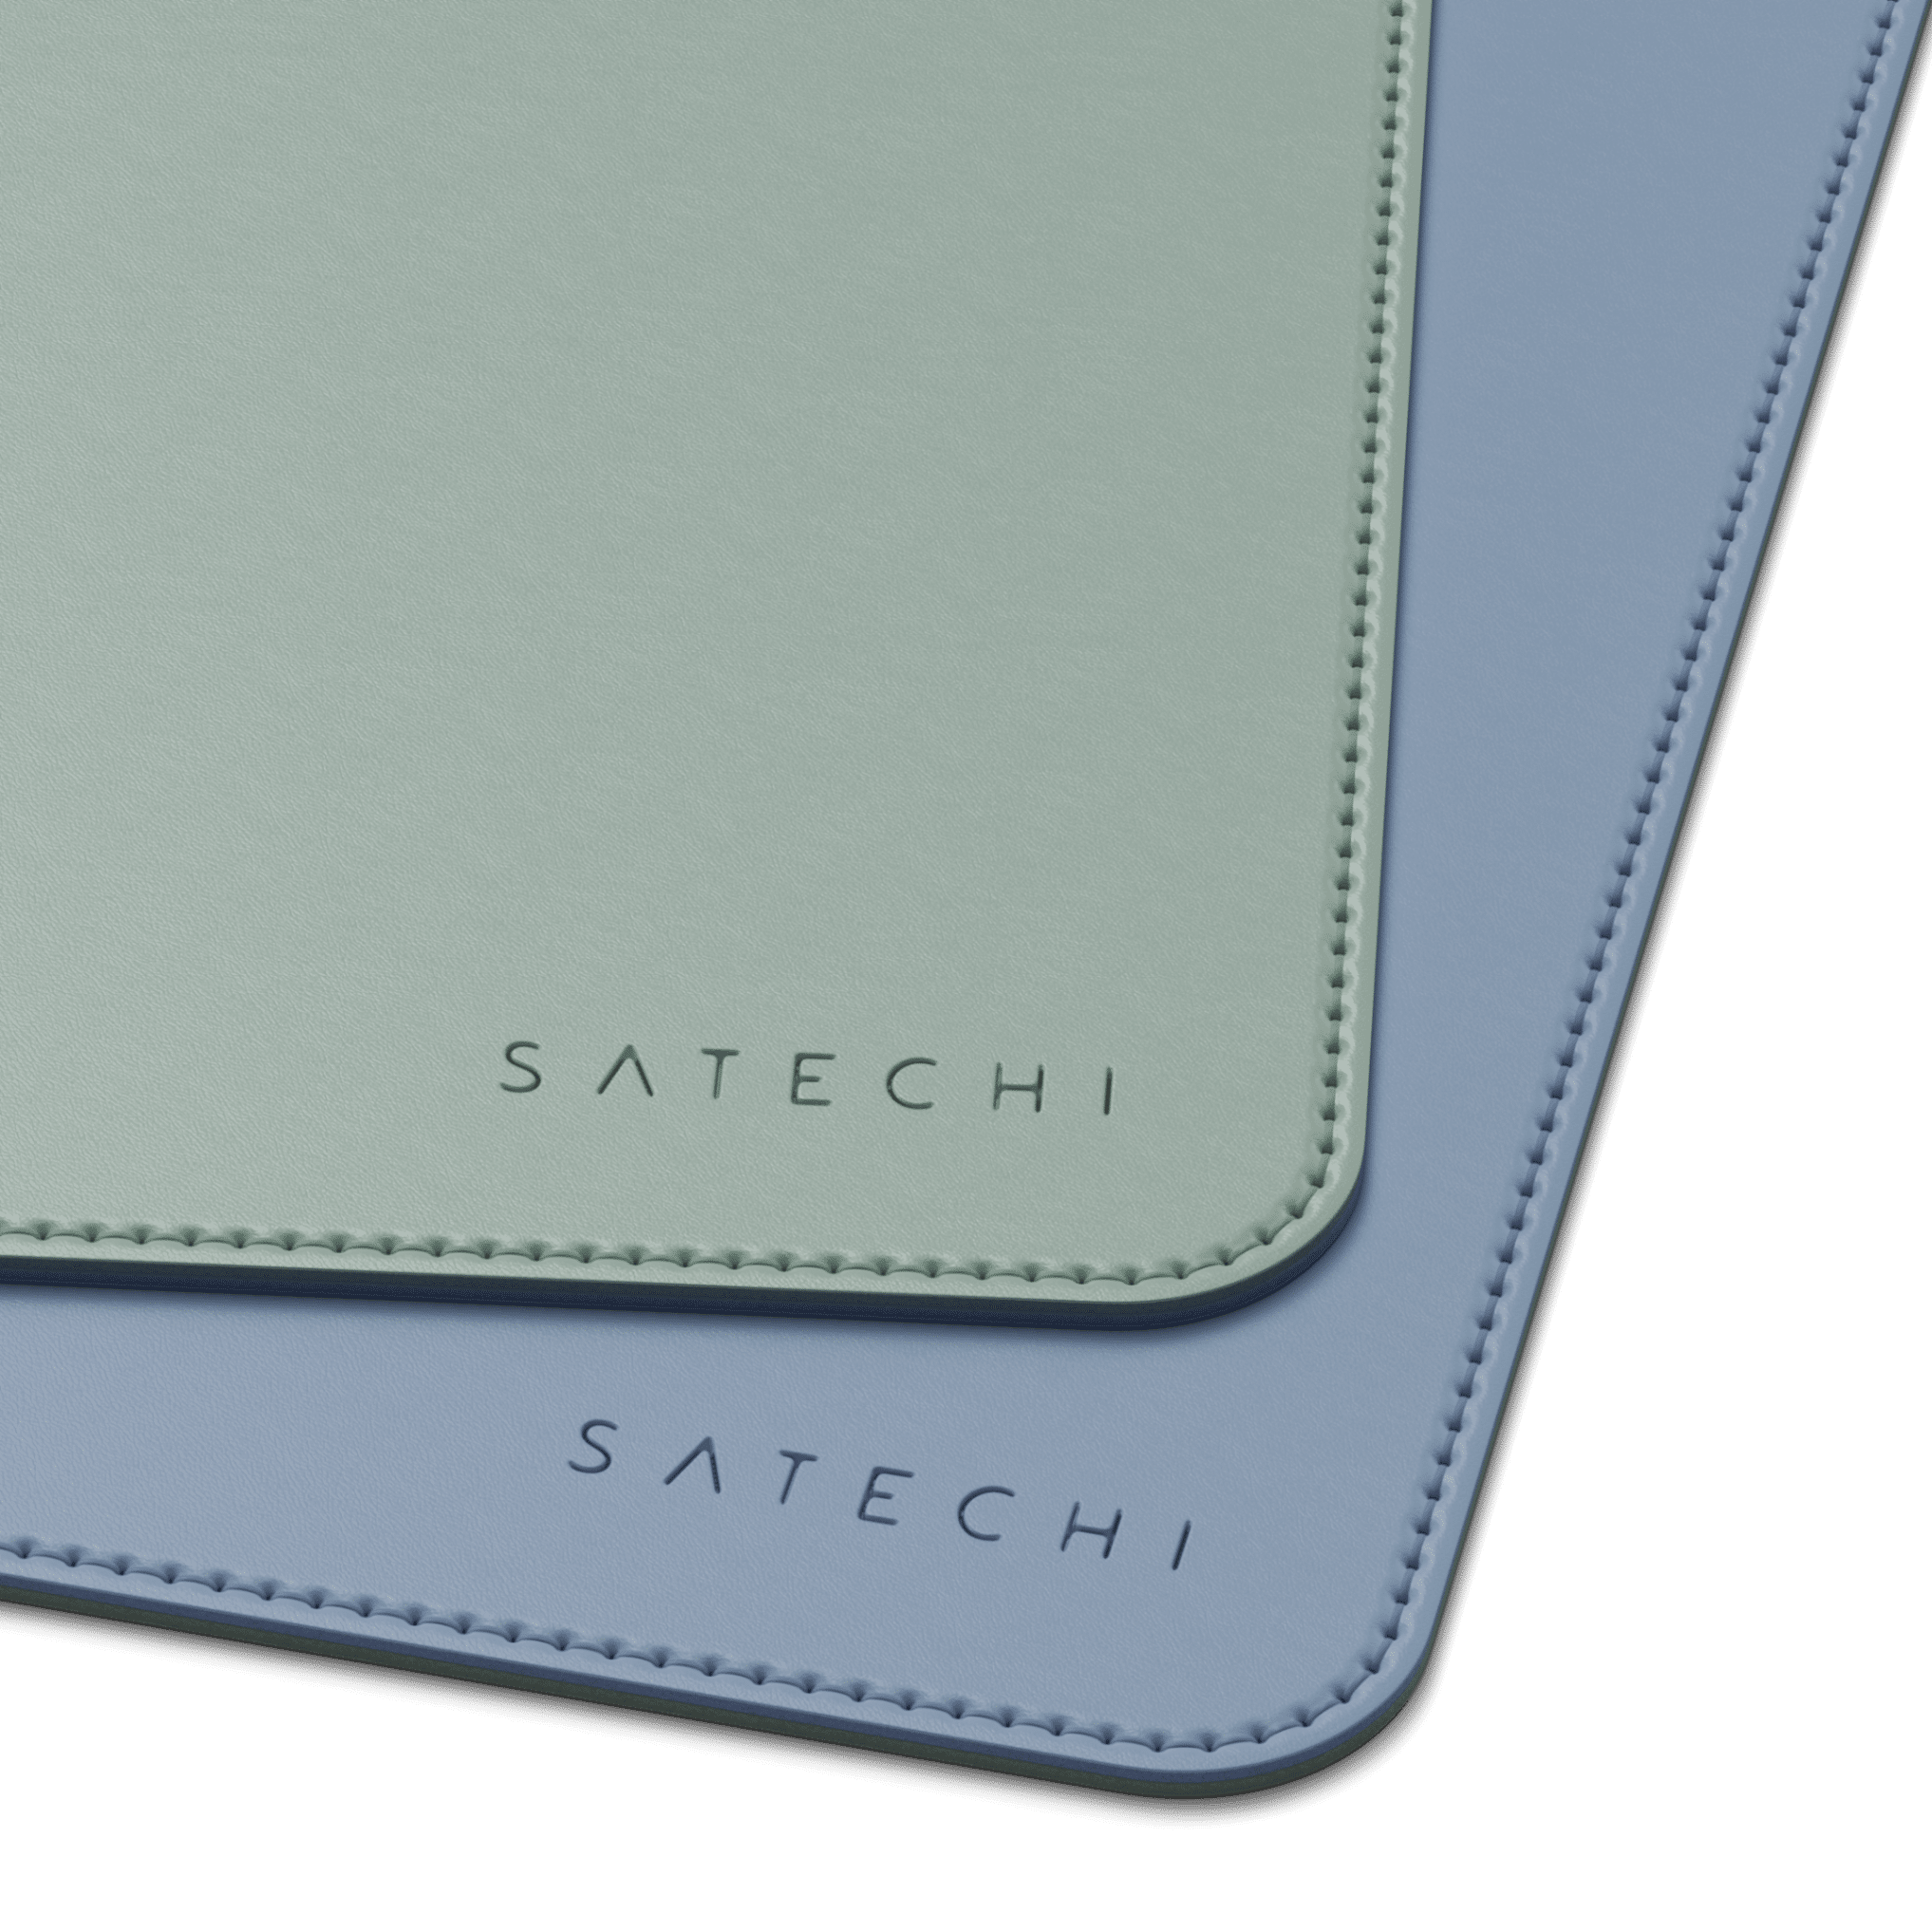 Dual Sided Eco-Leather Deskmate Desk Mats Satechi Blue & Green